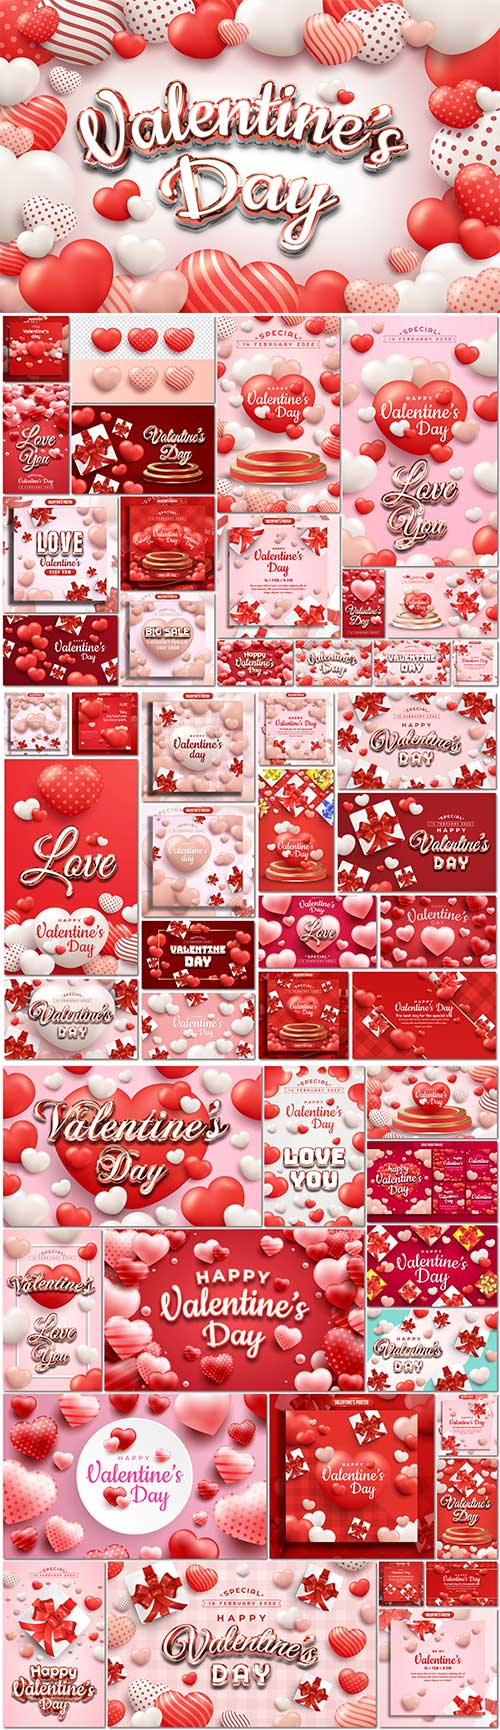 Romantic valentines day vector sett with gift box and realistic hearts